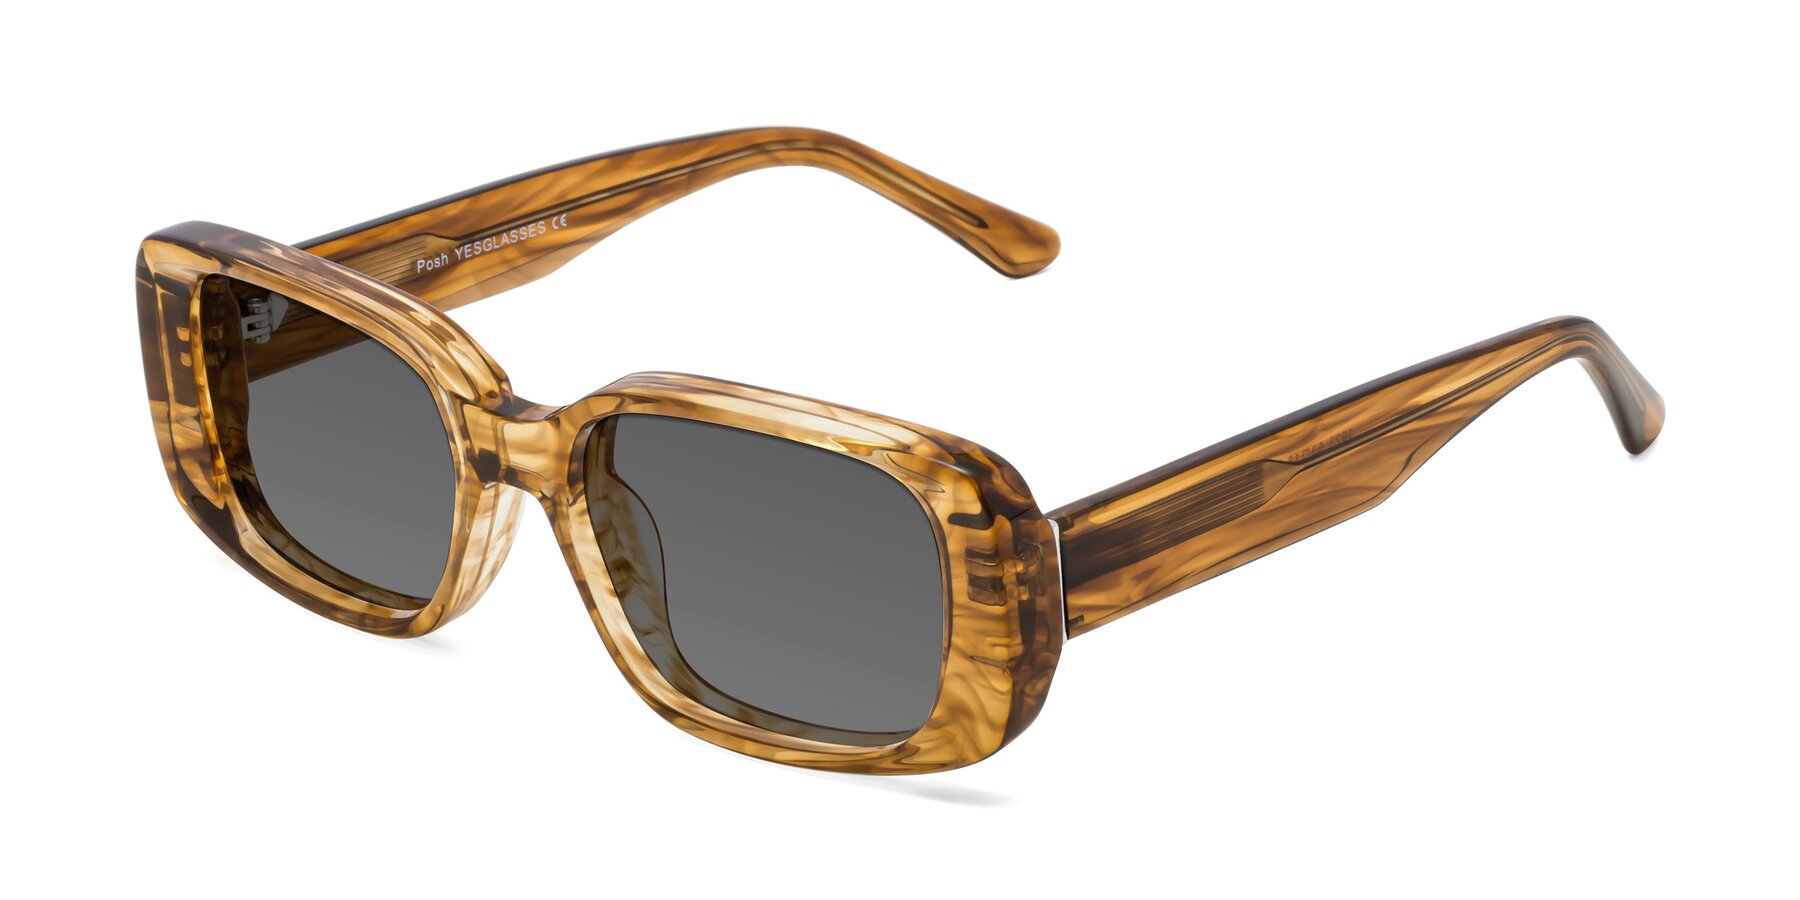 Angle of Posh in Stripe Amber with Medium Gray Tinted Lenses